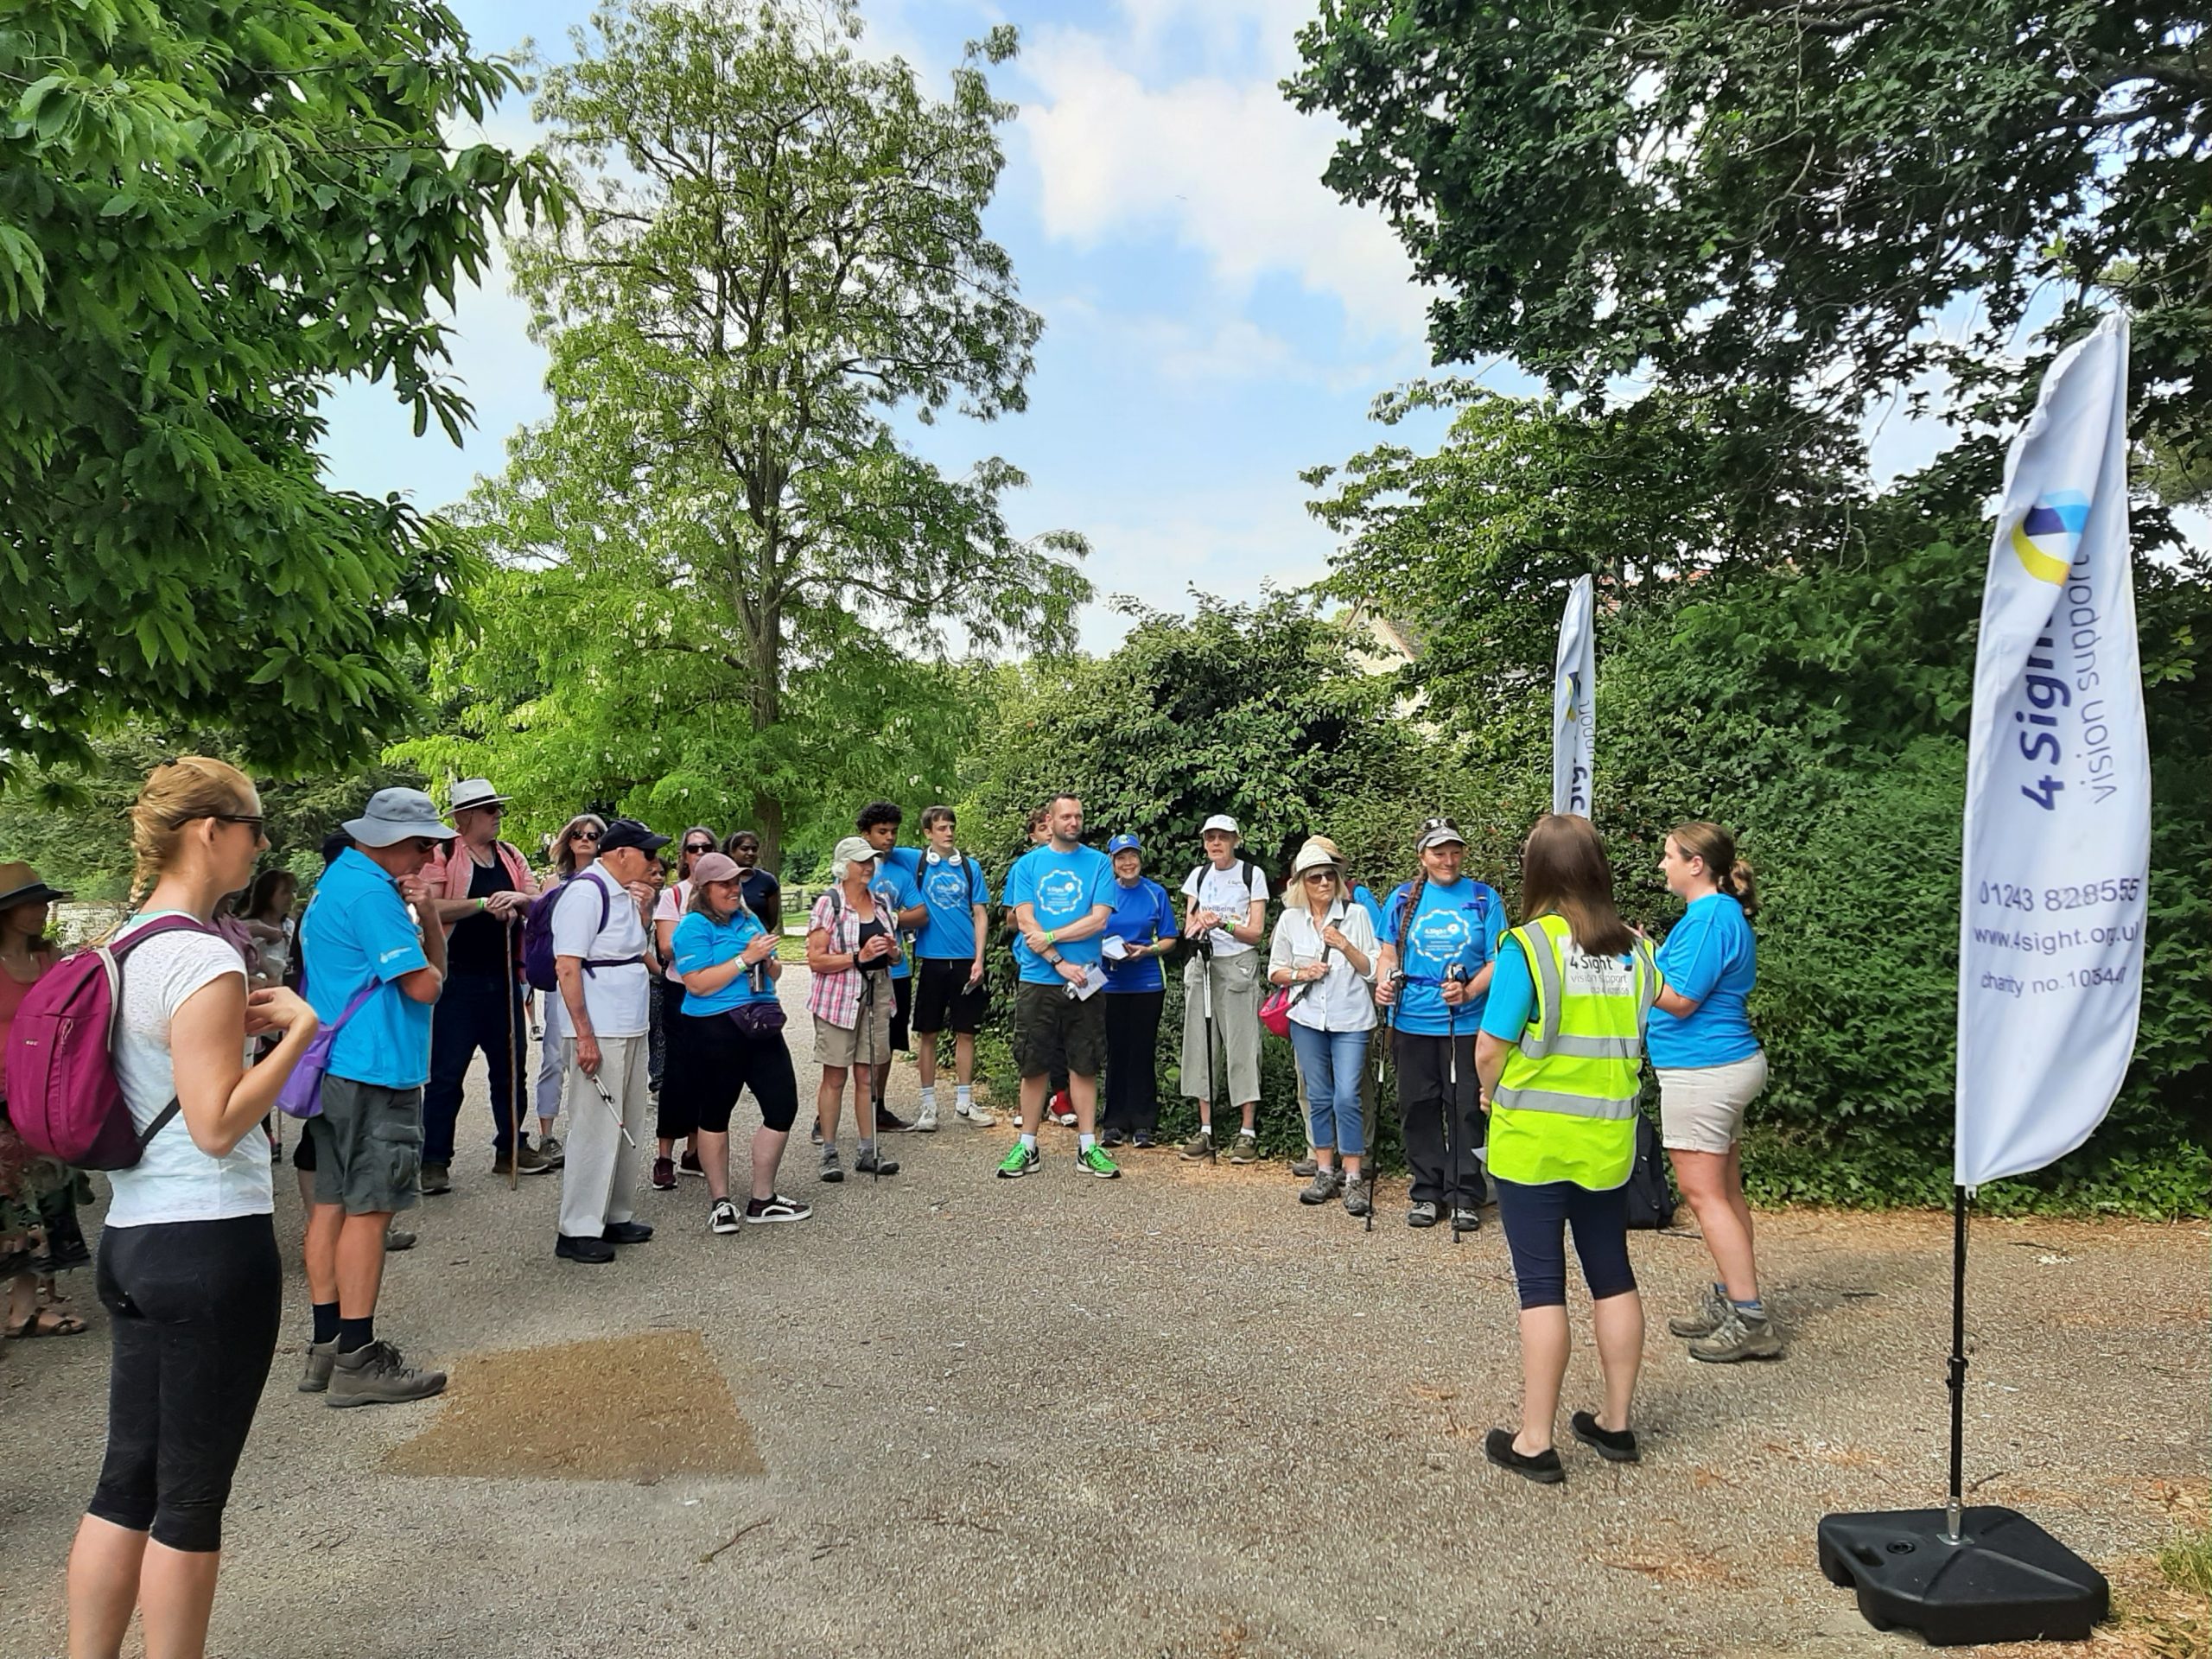 a large group of walkers in their gear are stood around listening to the walk briefing under the warm blue skies.